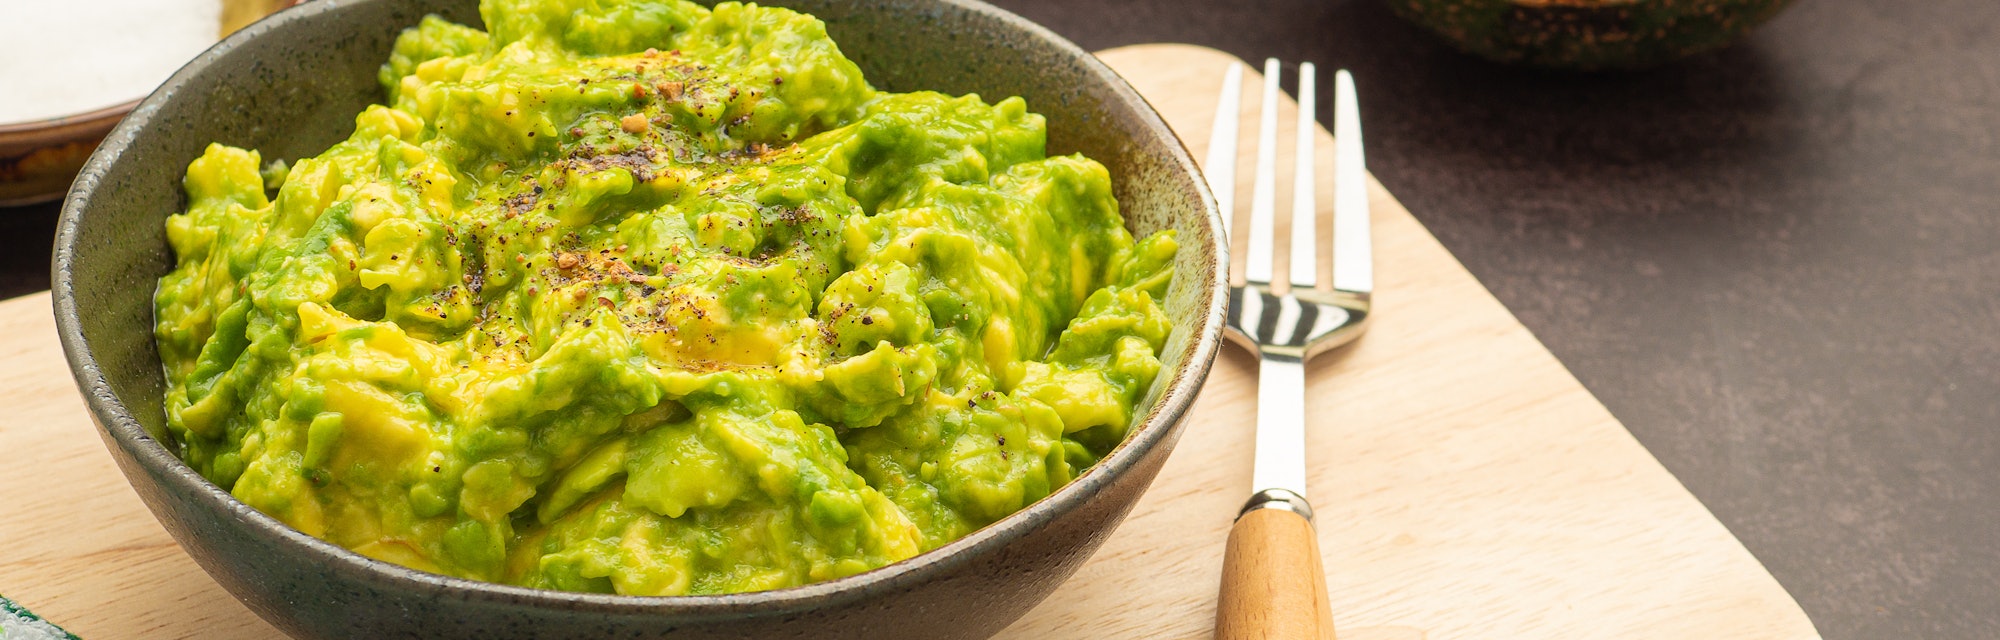 Fresh guacamole on a dish placed on a cutting wooden board with ingredients for homemade guacamole: ...